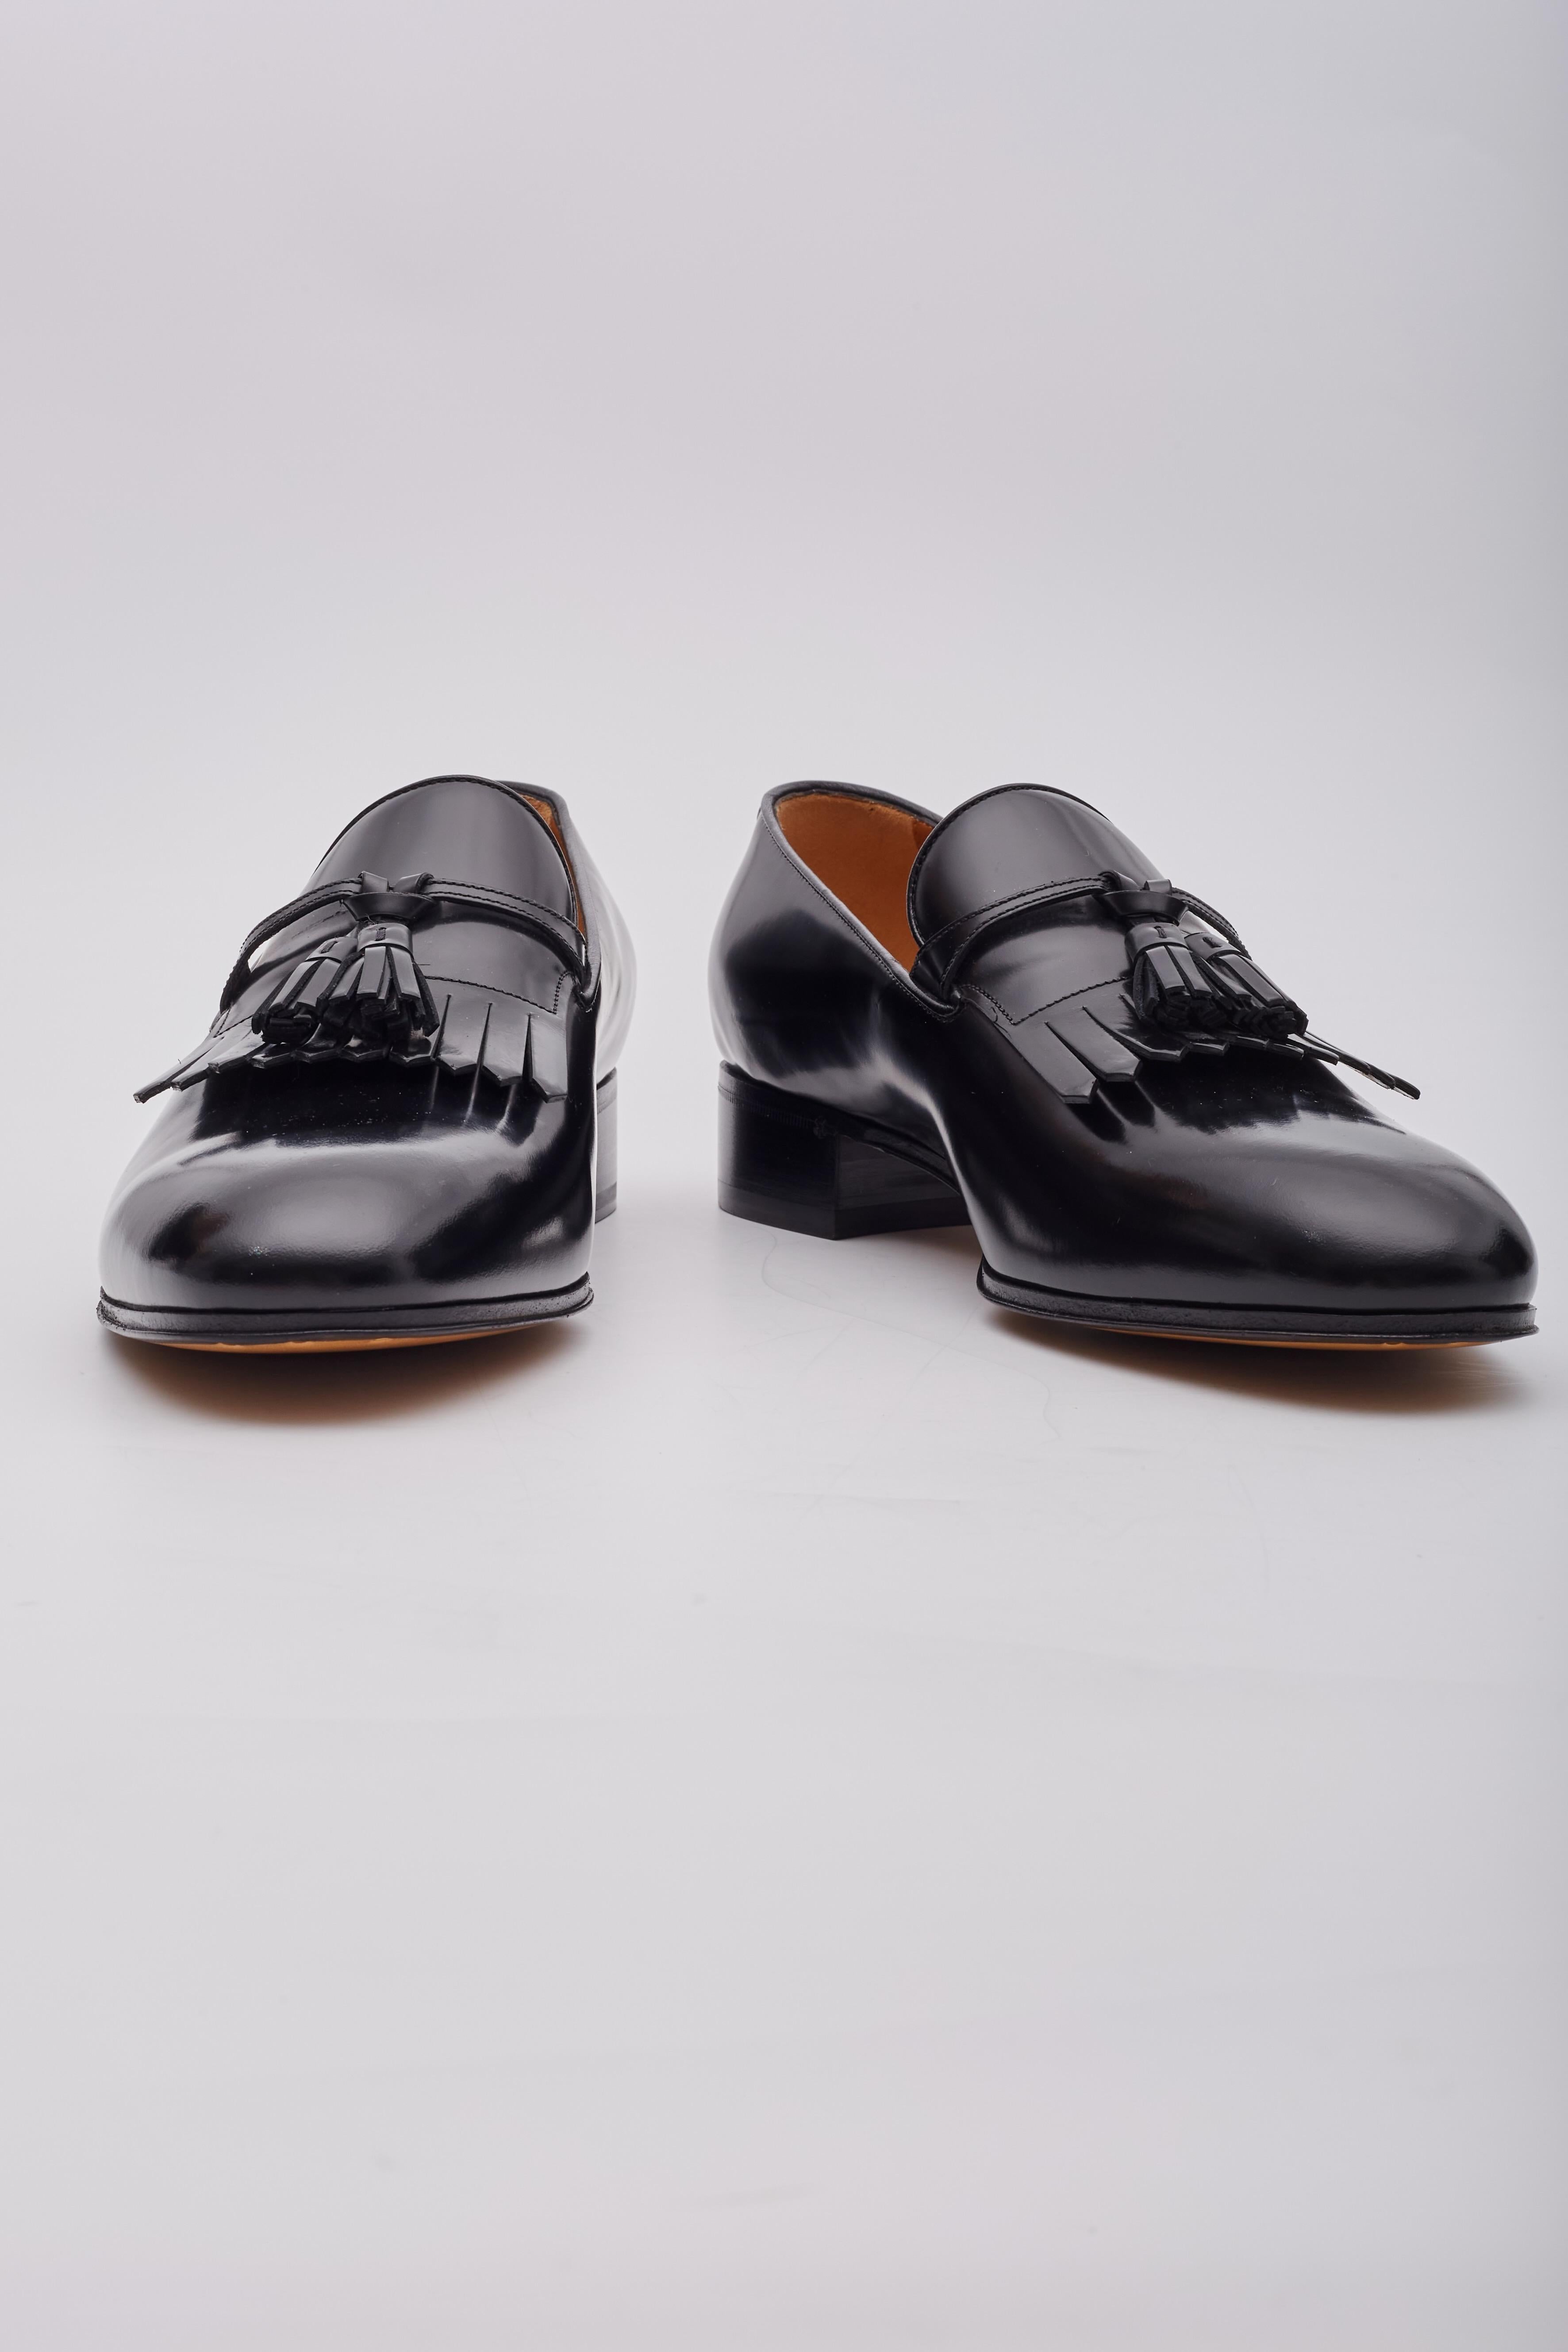 Gucci Leather Black Tassel Loafers Mens (US 9) In Excellent Condition For Sale In Montreal, Quebec